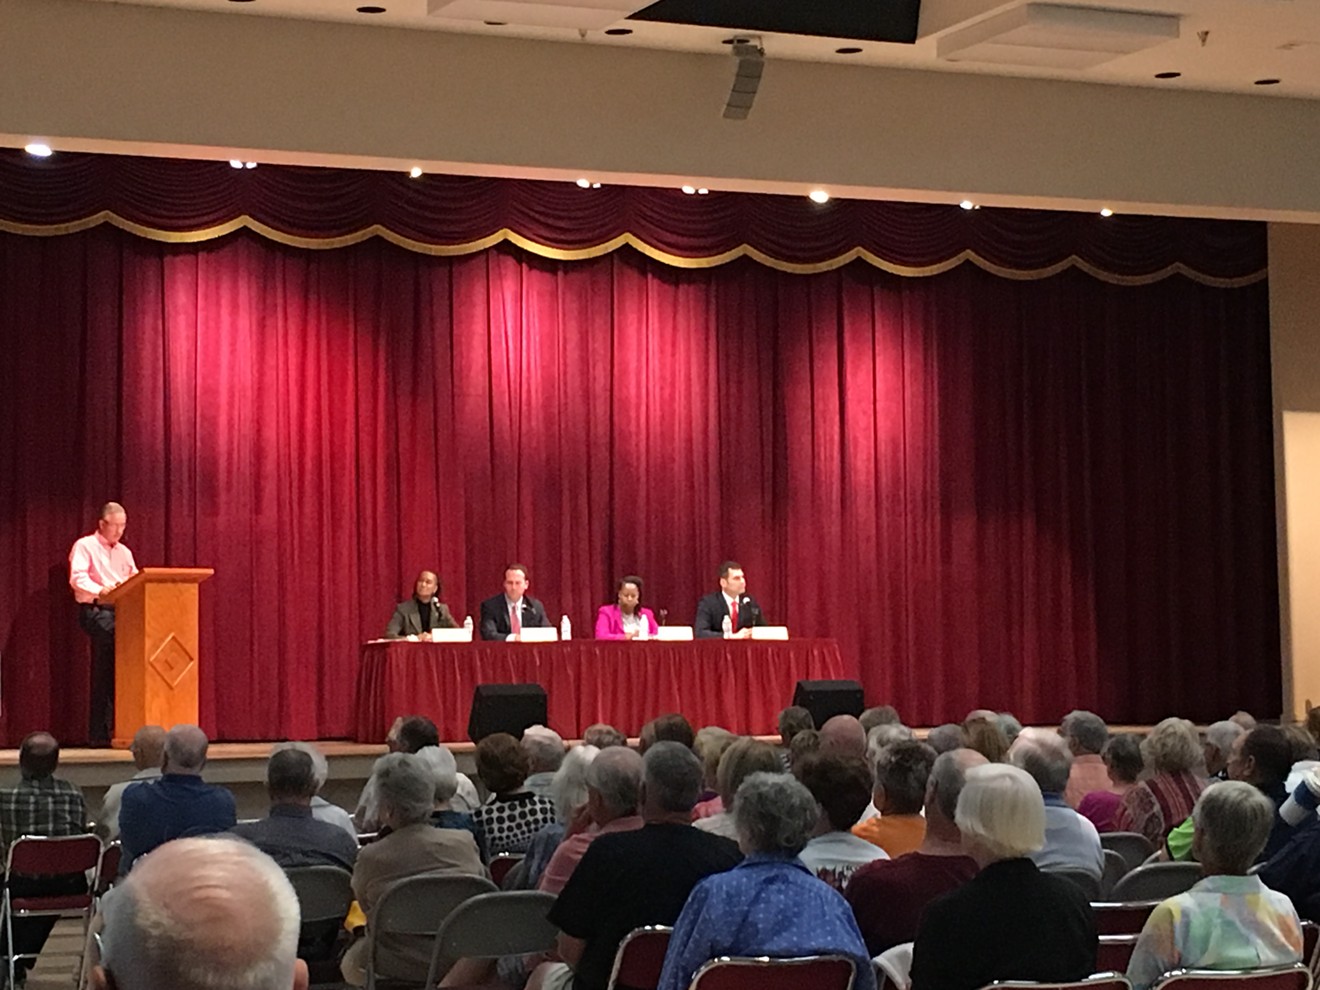 Candidates for the Arizona Corporation Commission trotted out campaign boilerplate material Monday night before an audience of deeply frustrated Sun City residents.